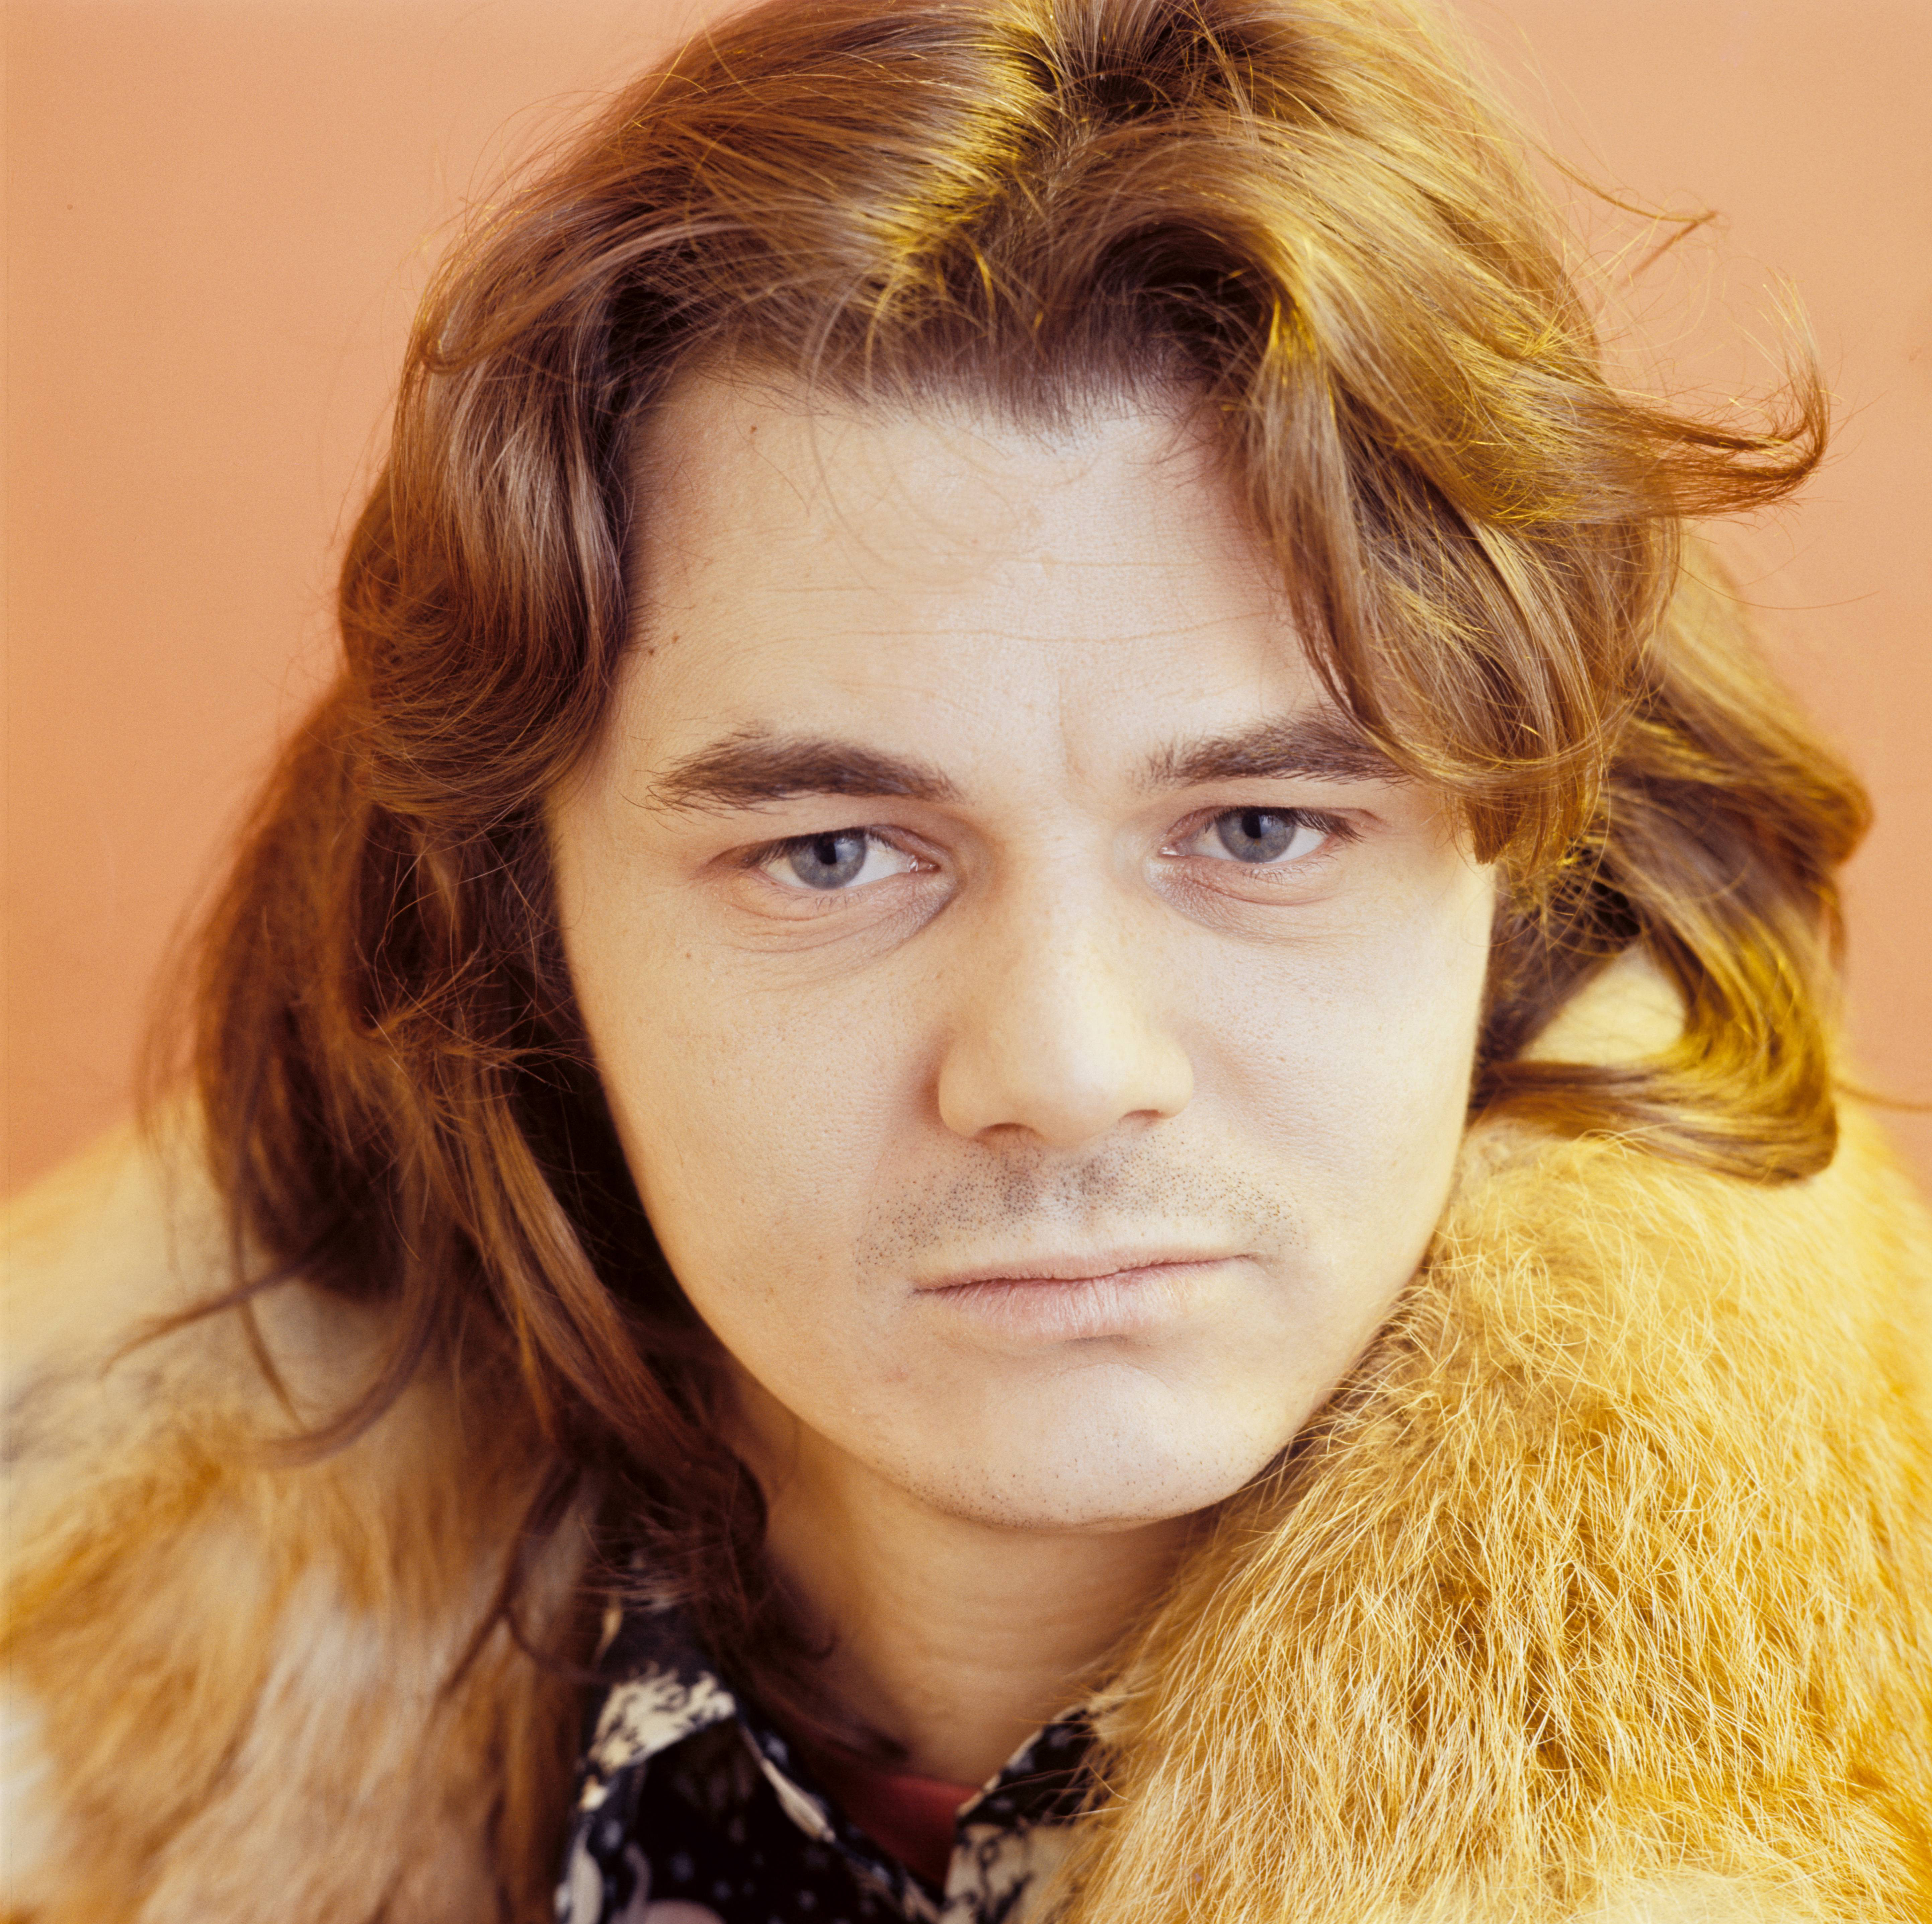 Steve Miller, wearing a feathery yellow coat, poses for a photo